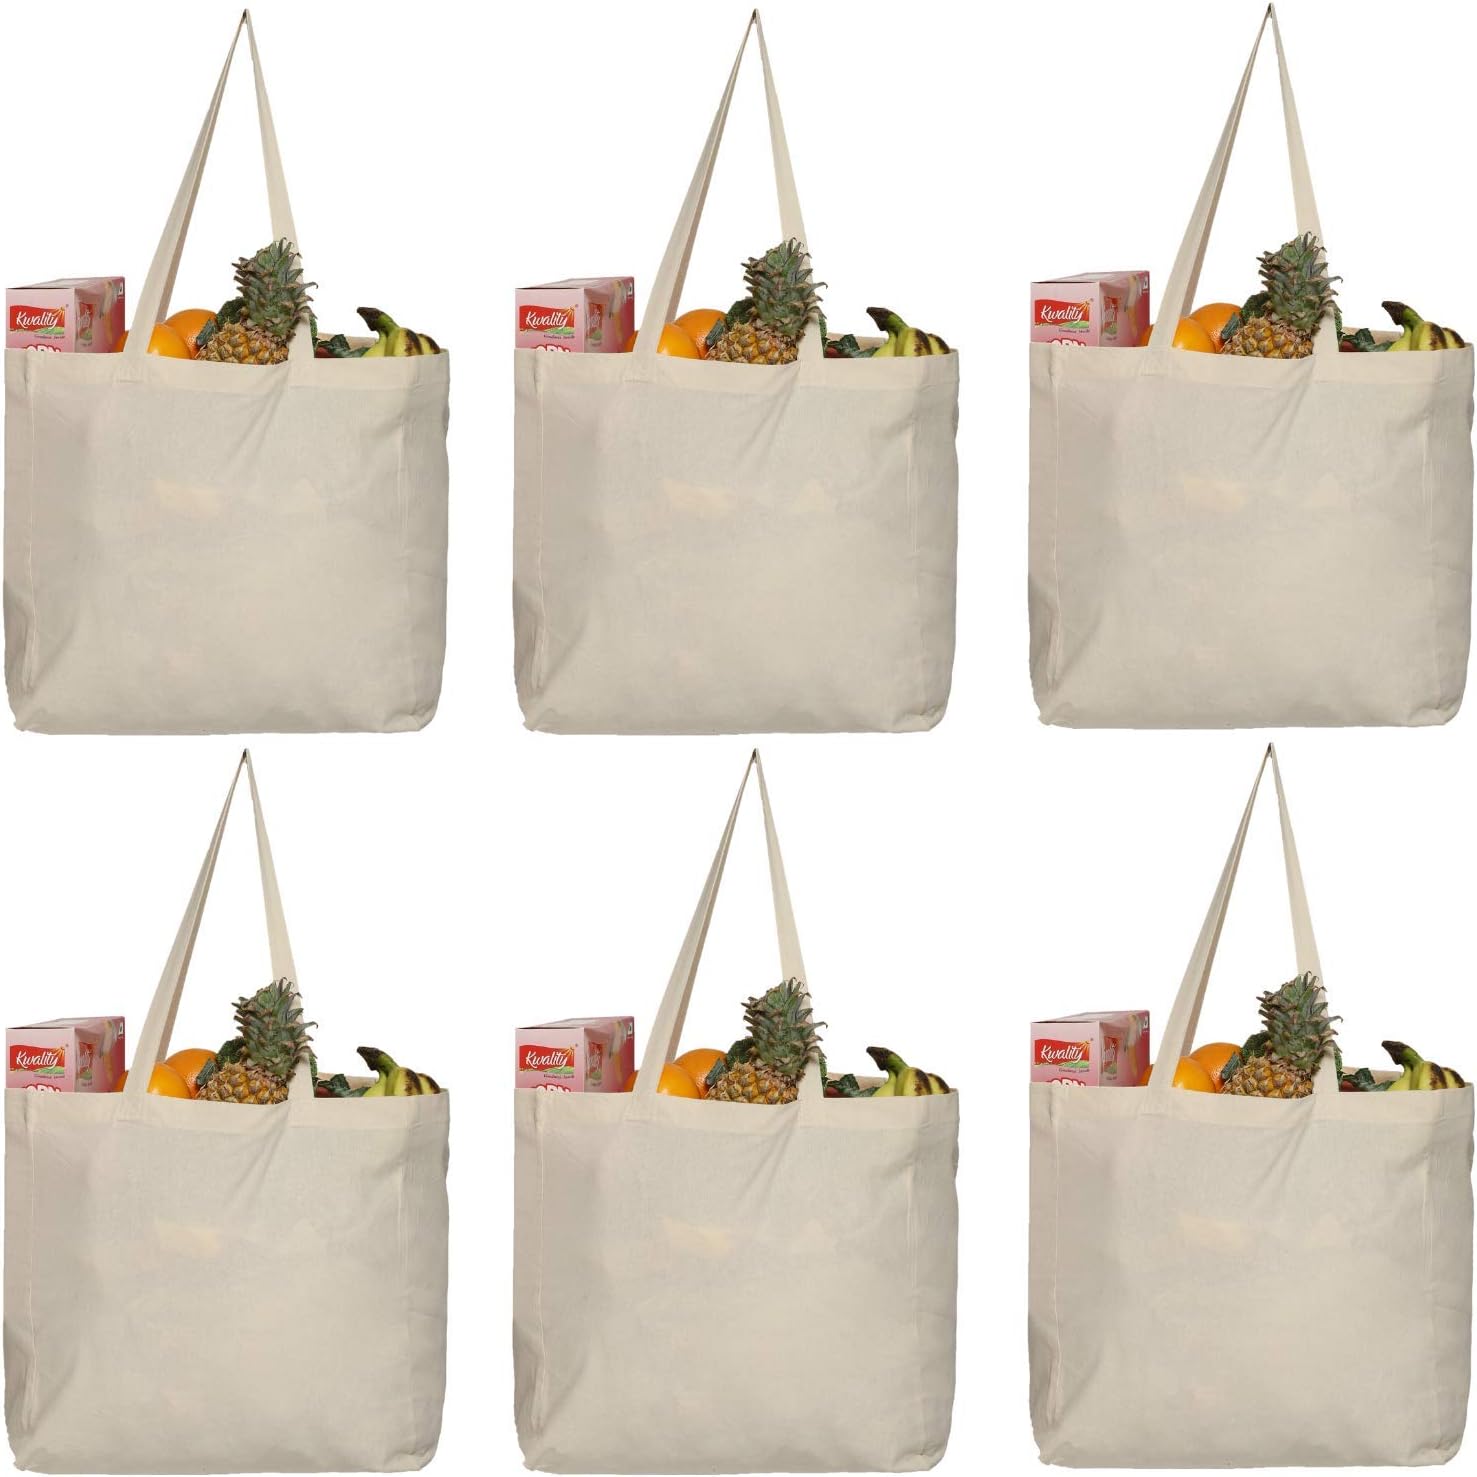 6 Pack Canvas Reusable Grocery Bags - Cotton Canvas Grocery Bag Cloth Shopping Tote With Long Handles Bulk - Heavy Duty Grocery Tote Bag - Large, Foldable and Lightweight - Capacity 40 lbs